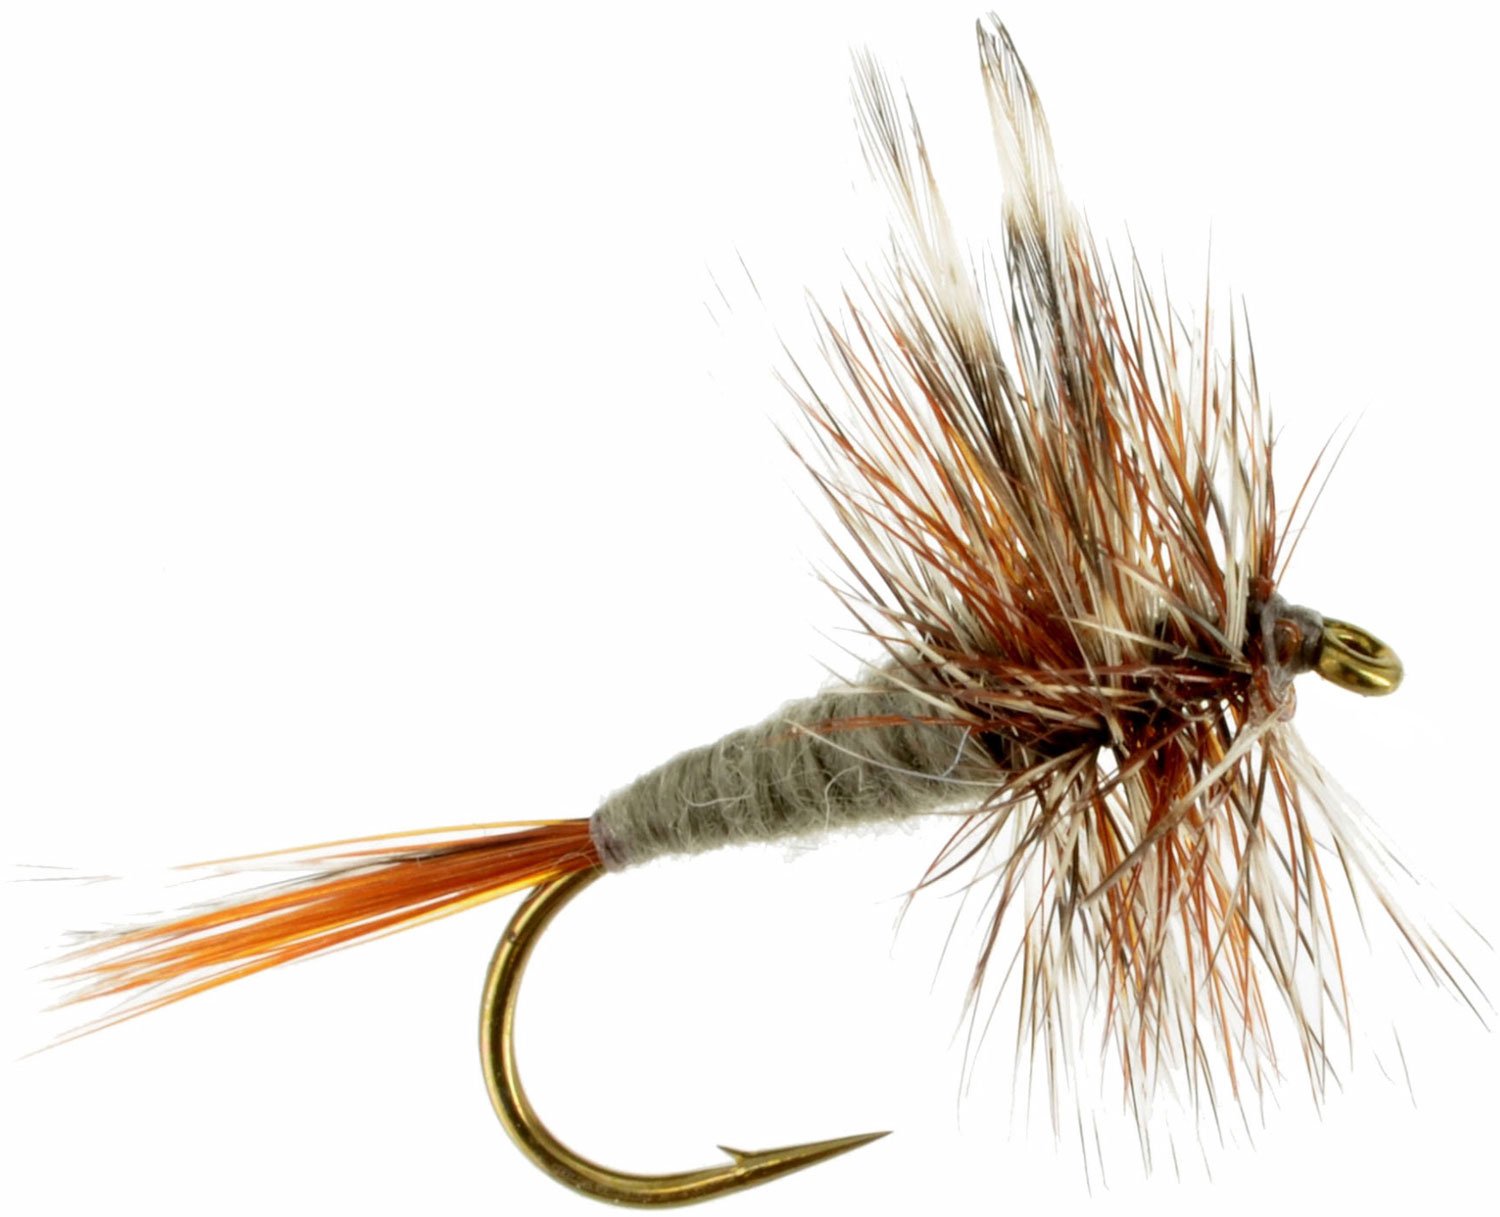 6 Pack Adams Dry Fly Good All year Adams Fly Fishing Flies Choice of Sizes 